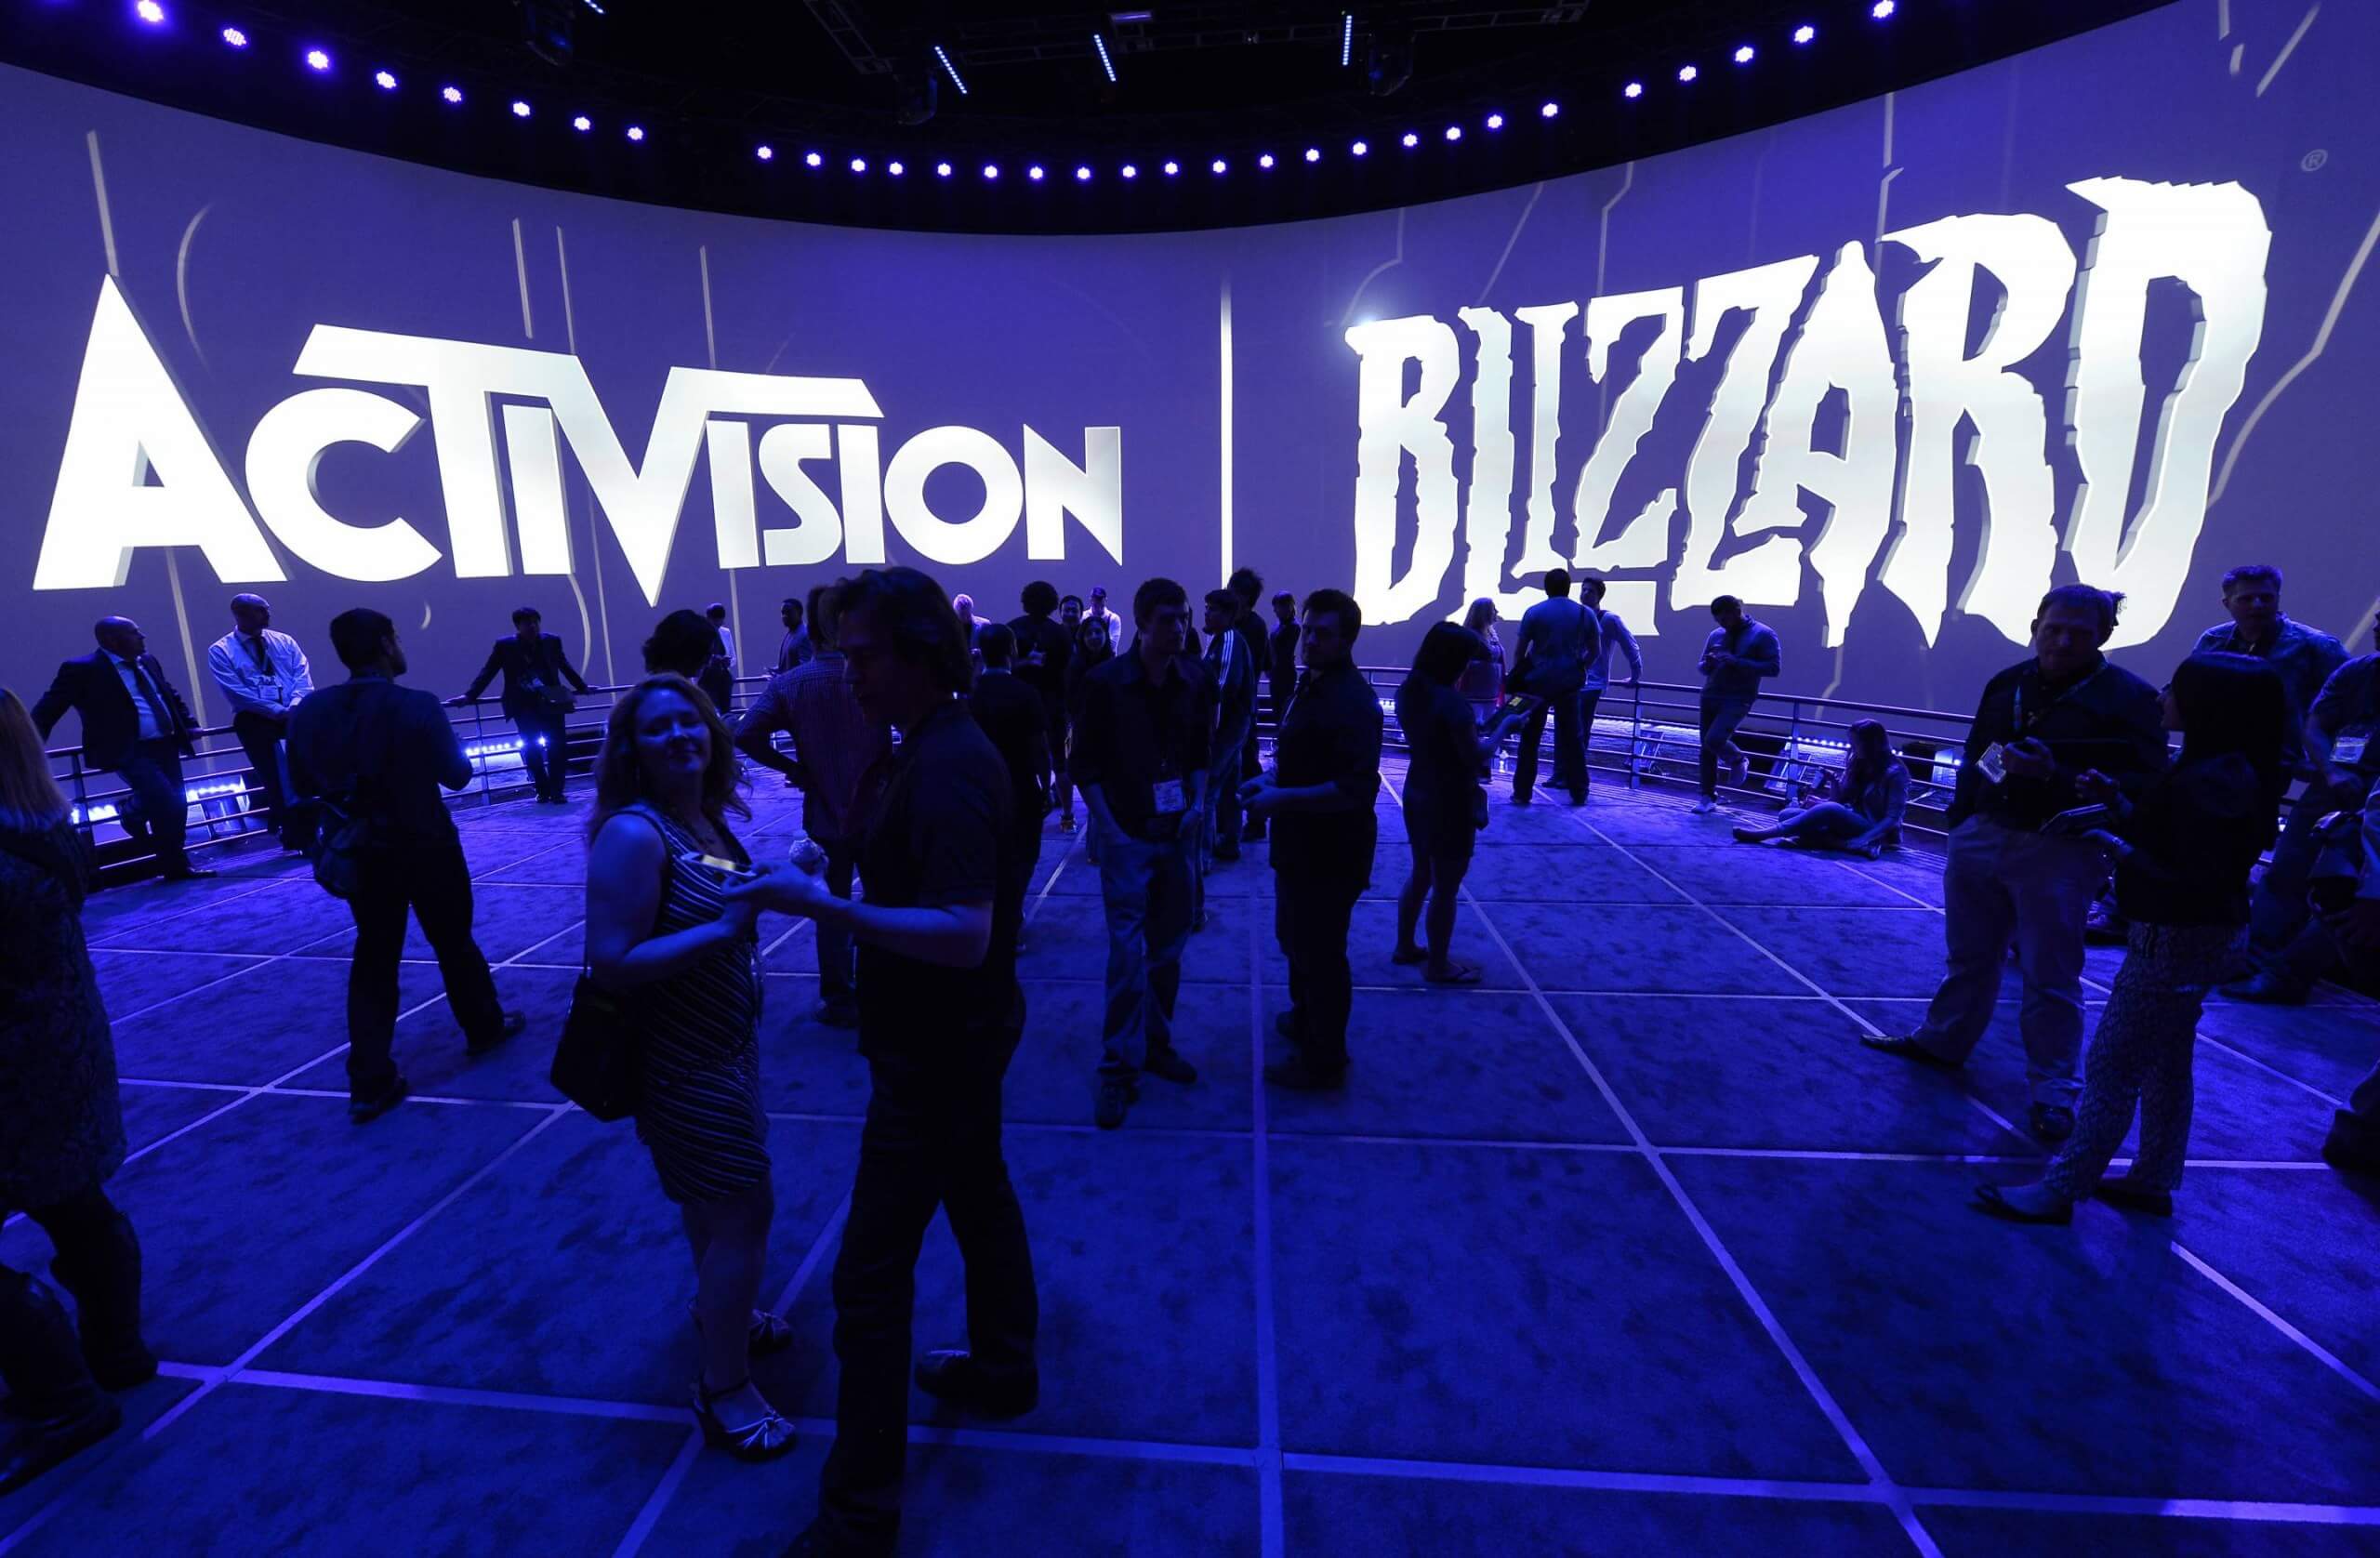 Activision Blizzard worried that downsizing will disrupt operations